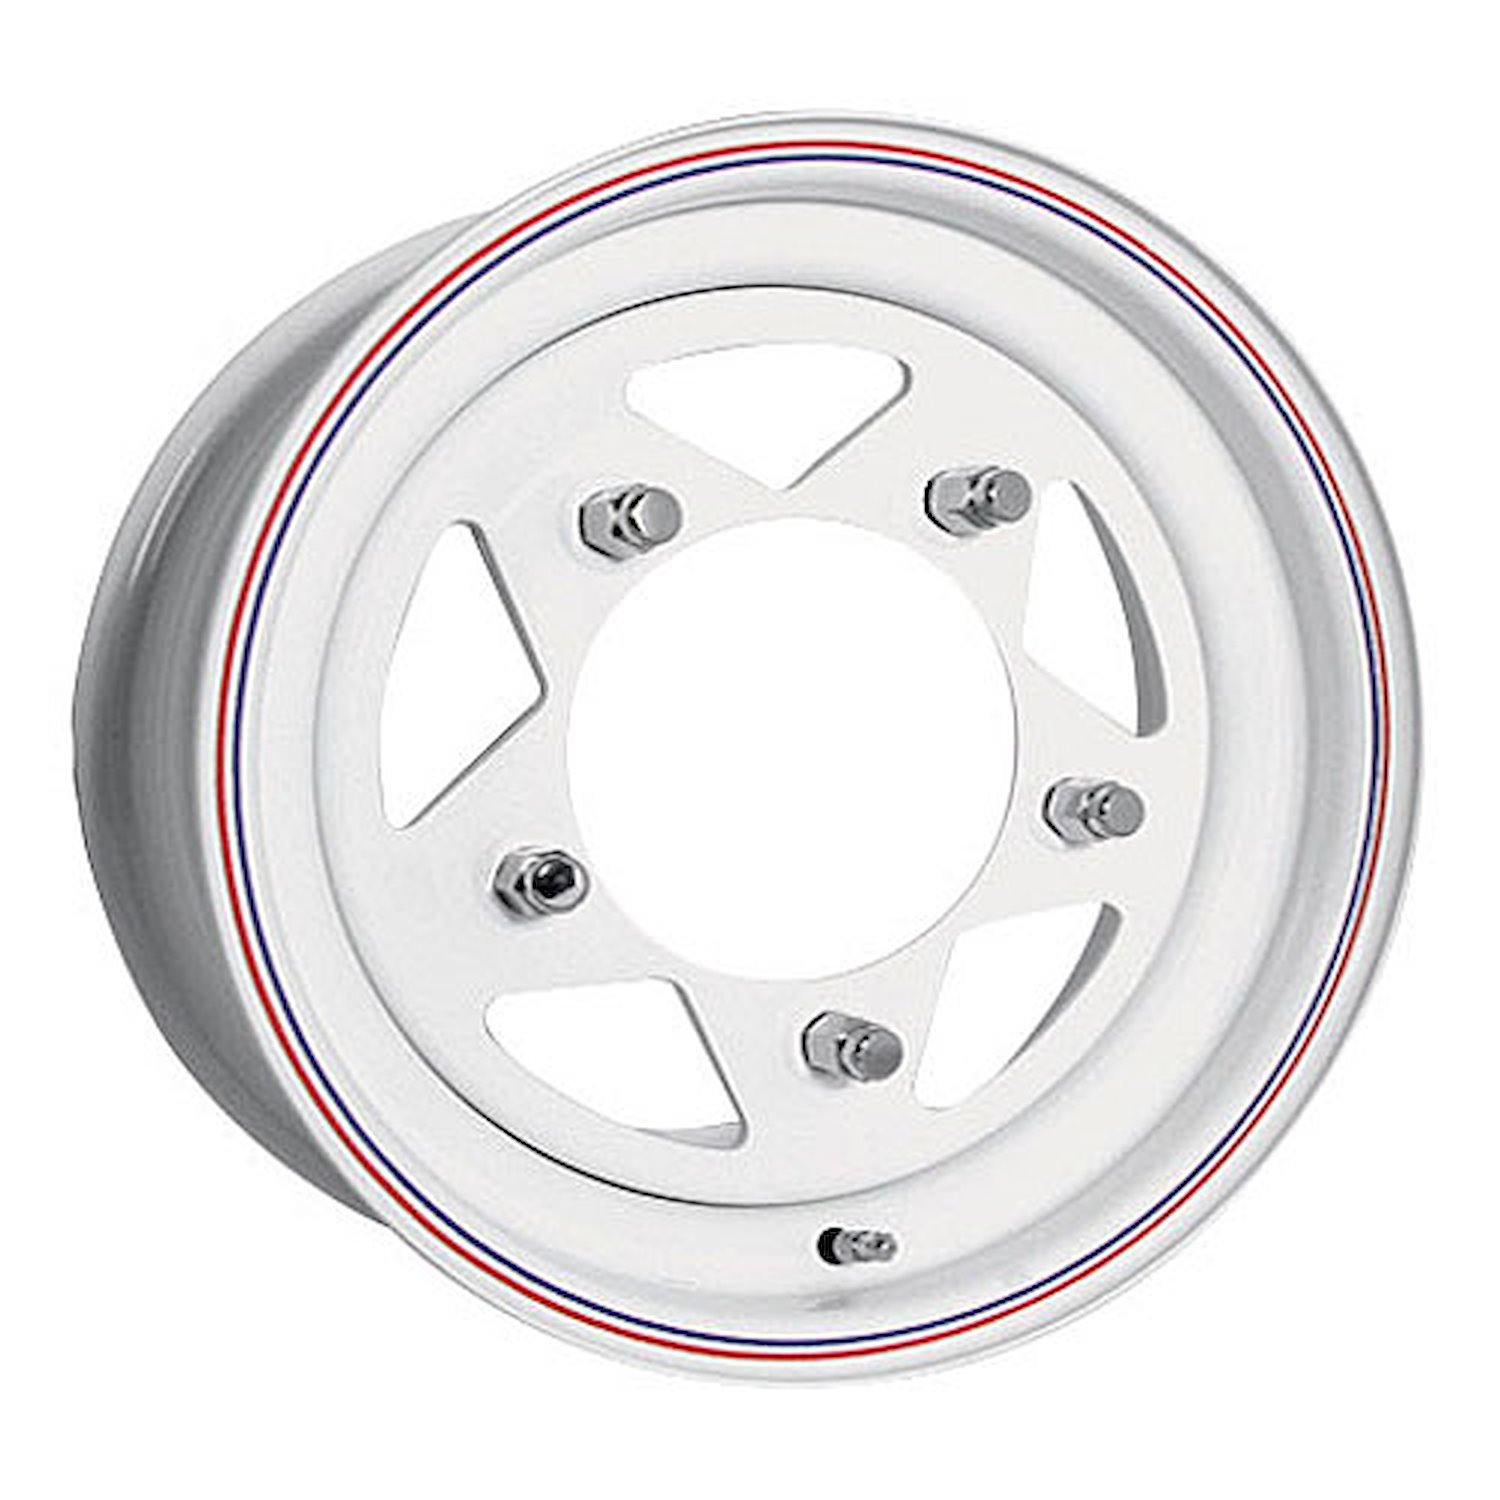 WHITE BAJA STAR VW 15 x 7 5 x 205 Bolt Circle 35 Back Spacing 13 offset 160 Center Bore 1100 lbs Load Rating